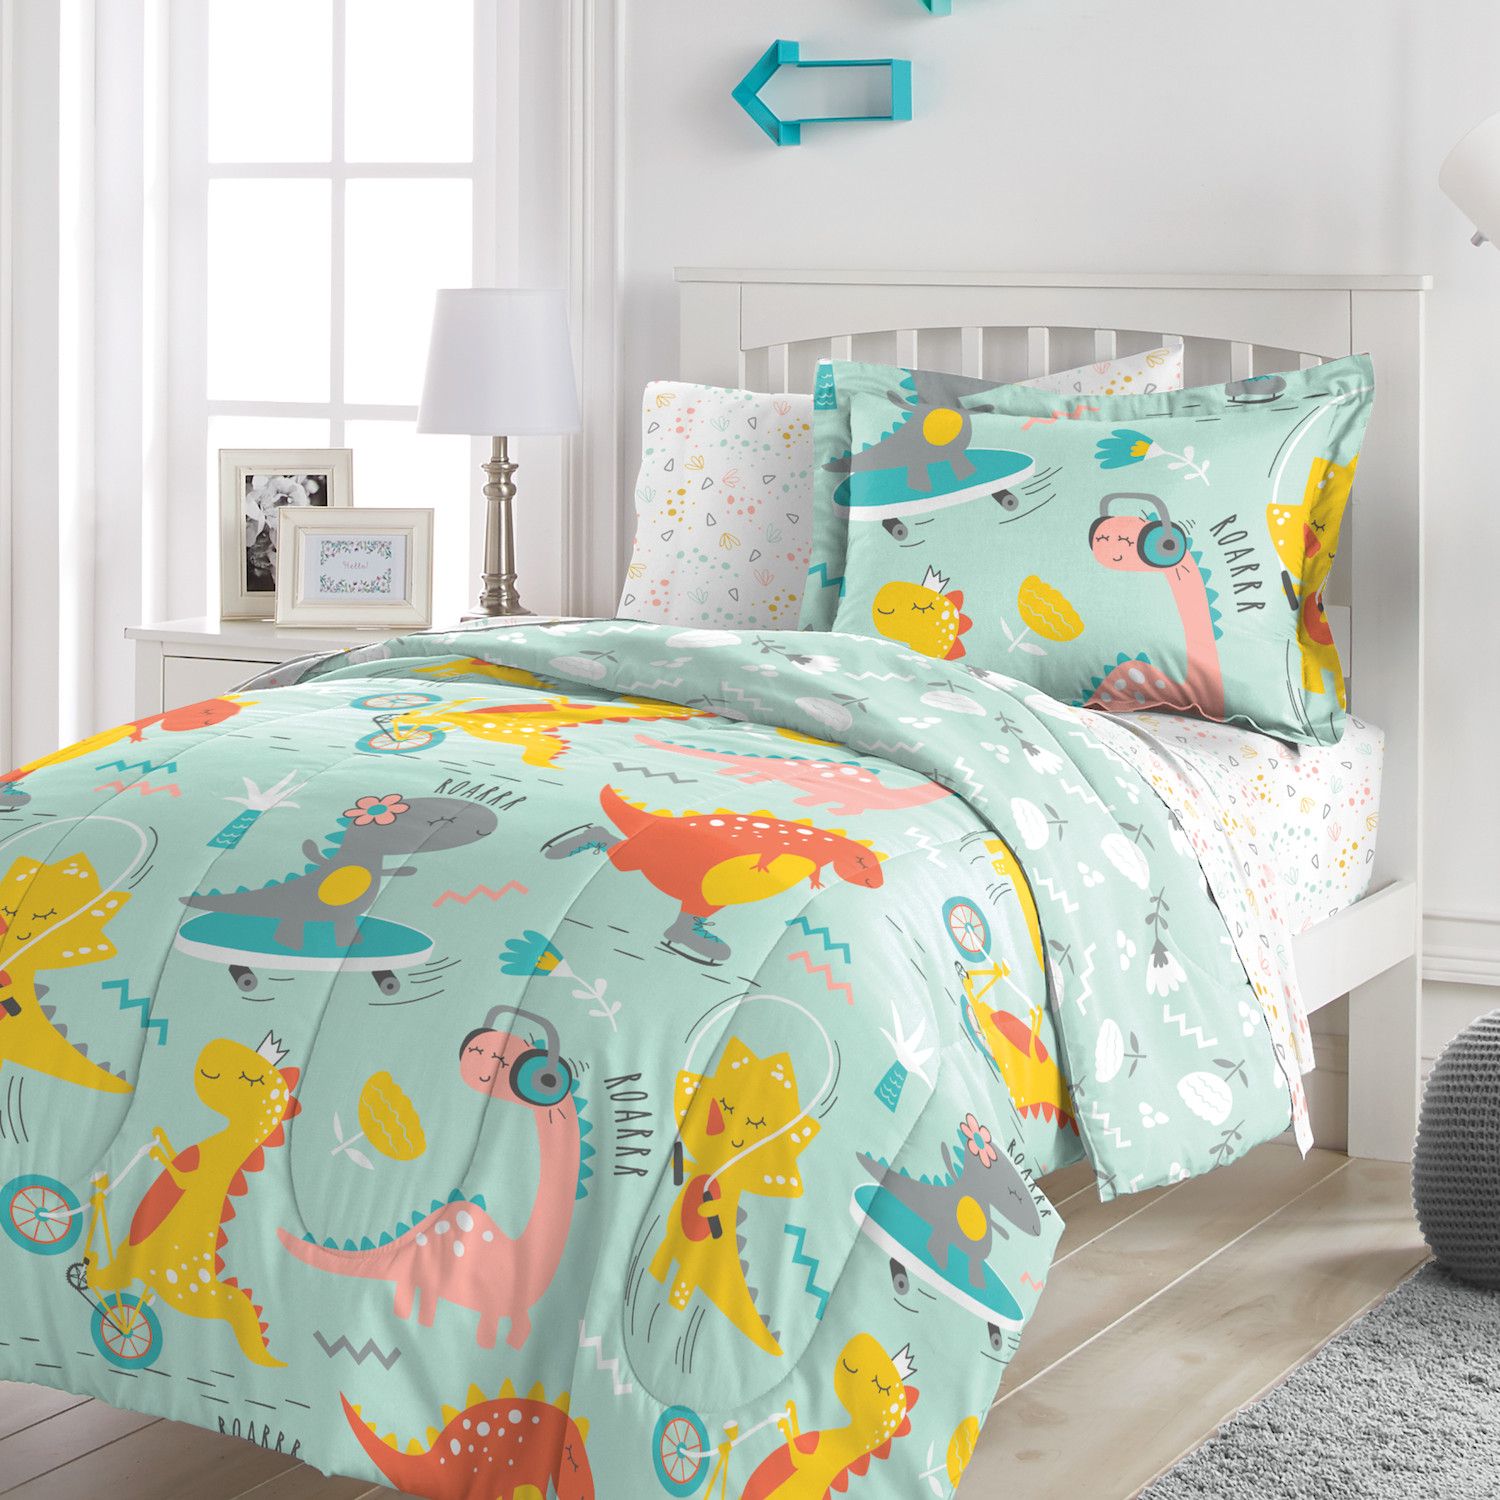 Image for Dream Factory Dino Time Comforter Set at Kohl's.